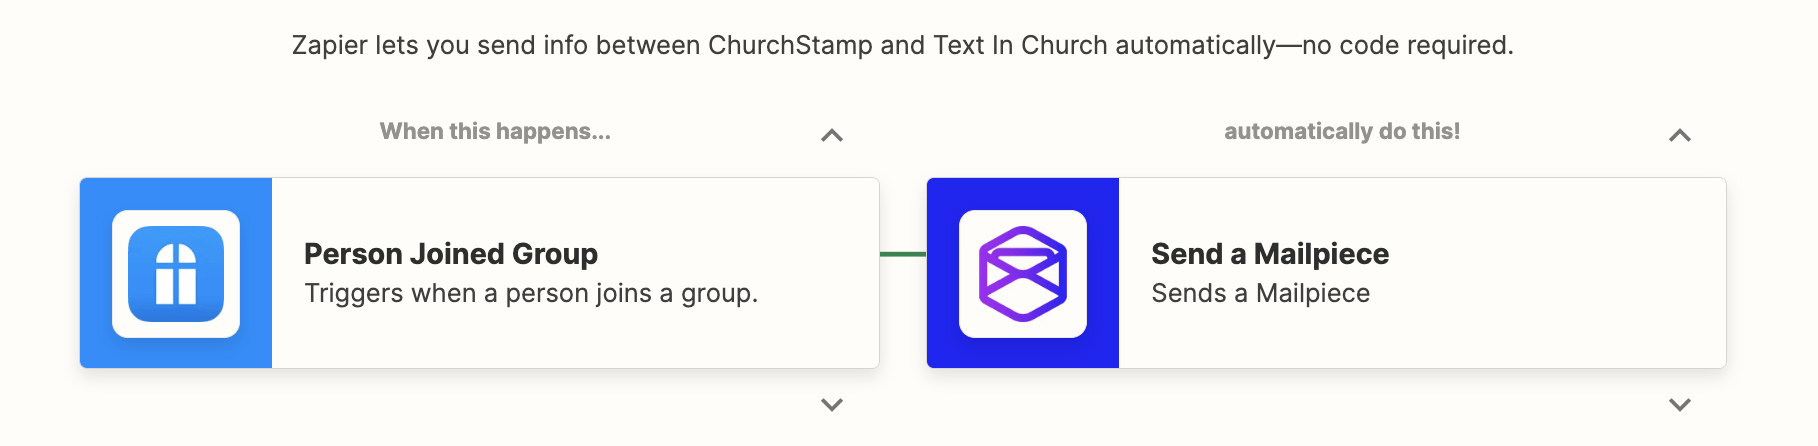 Send Postcards With ChurchStamp and TextInChurch